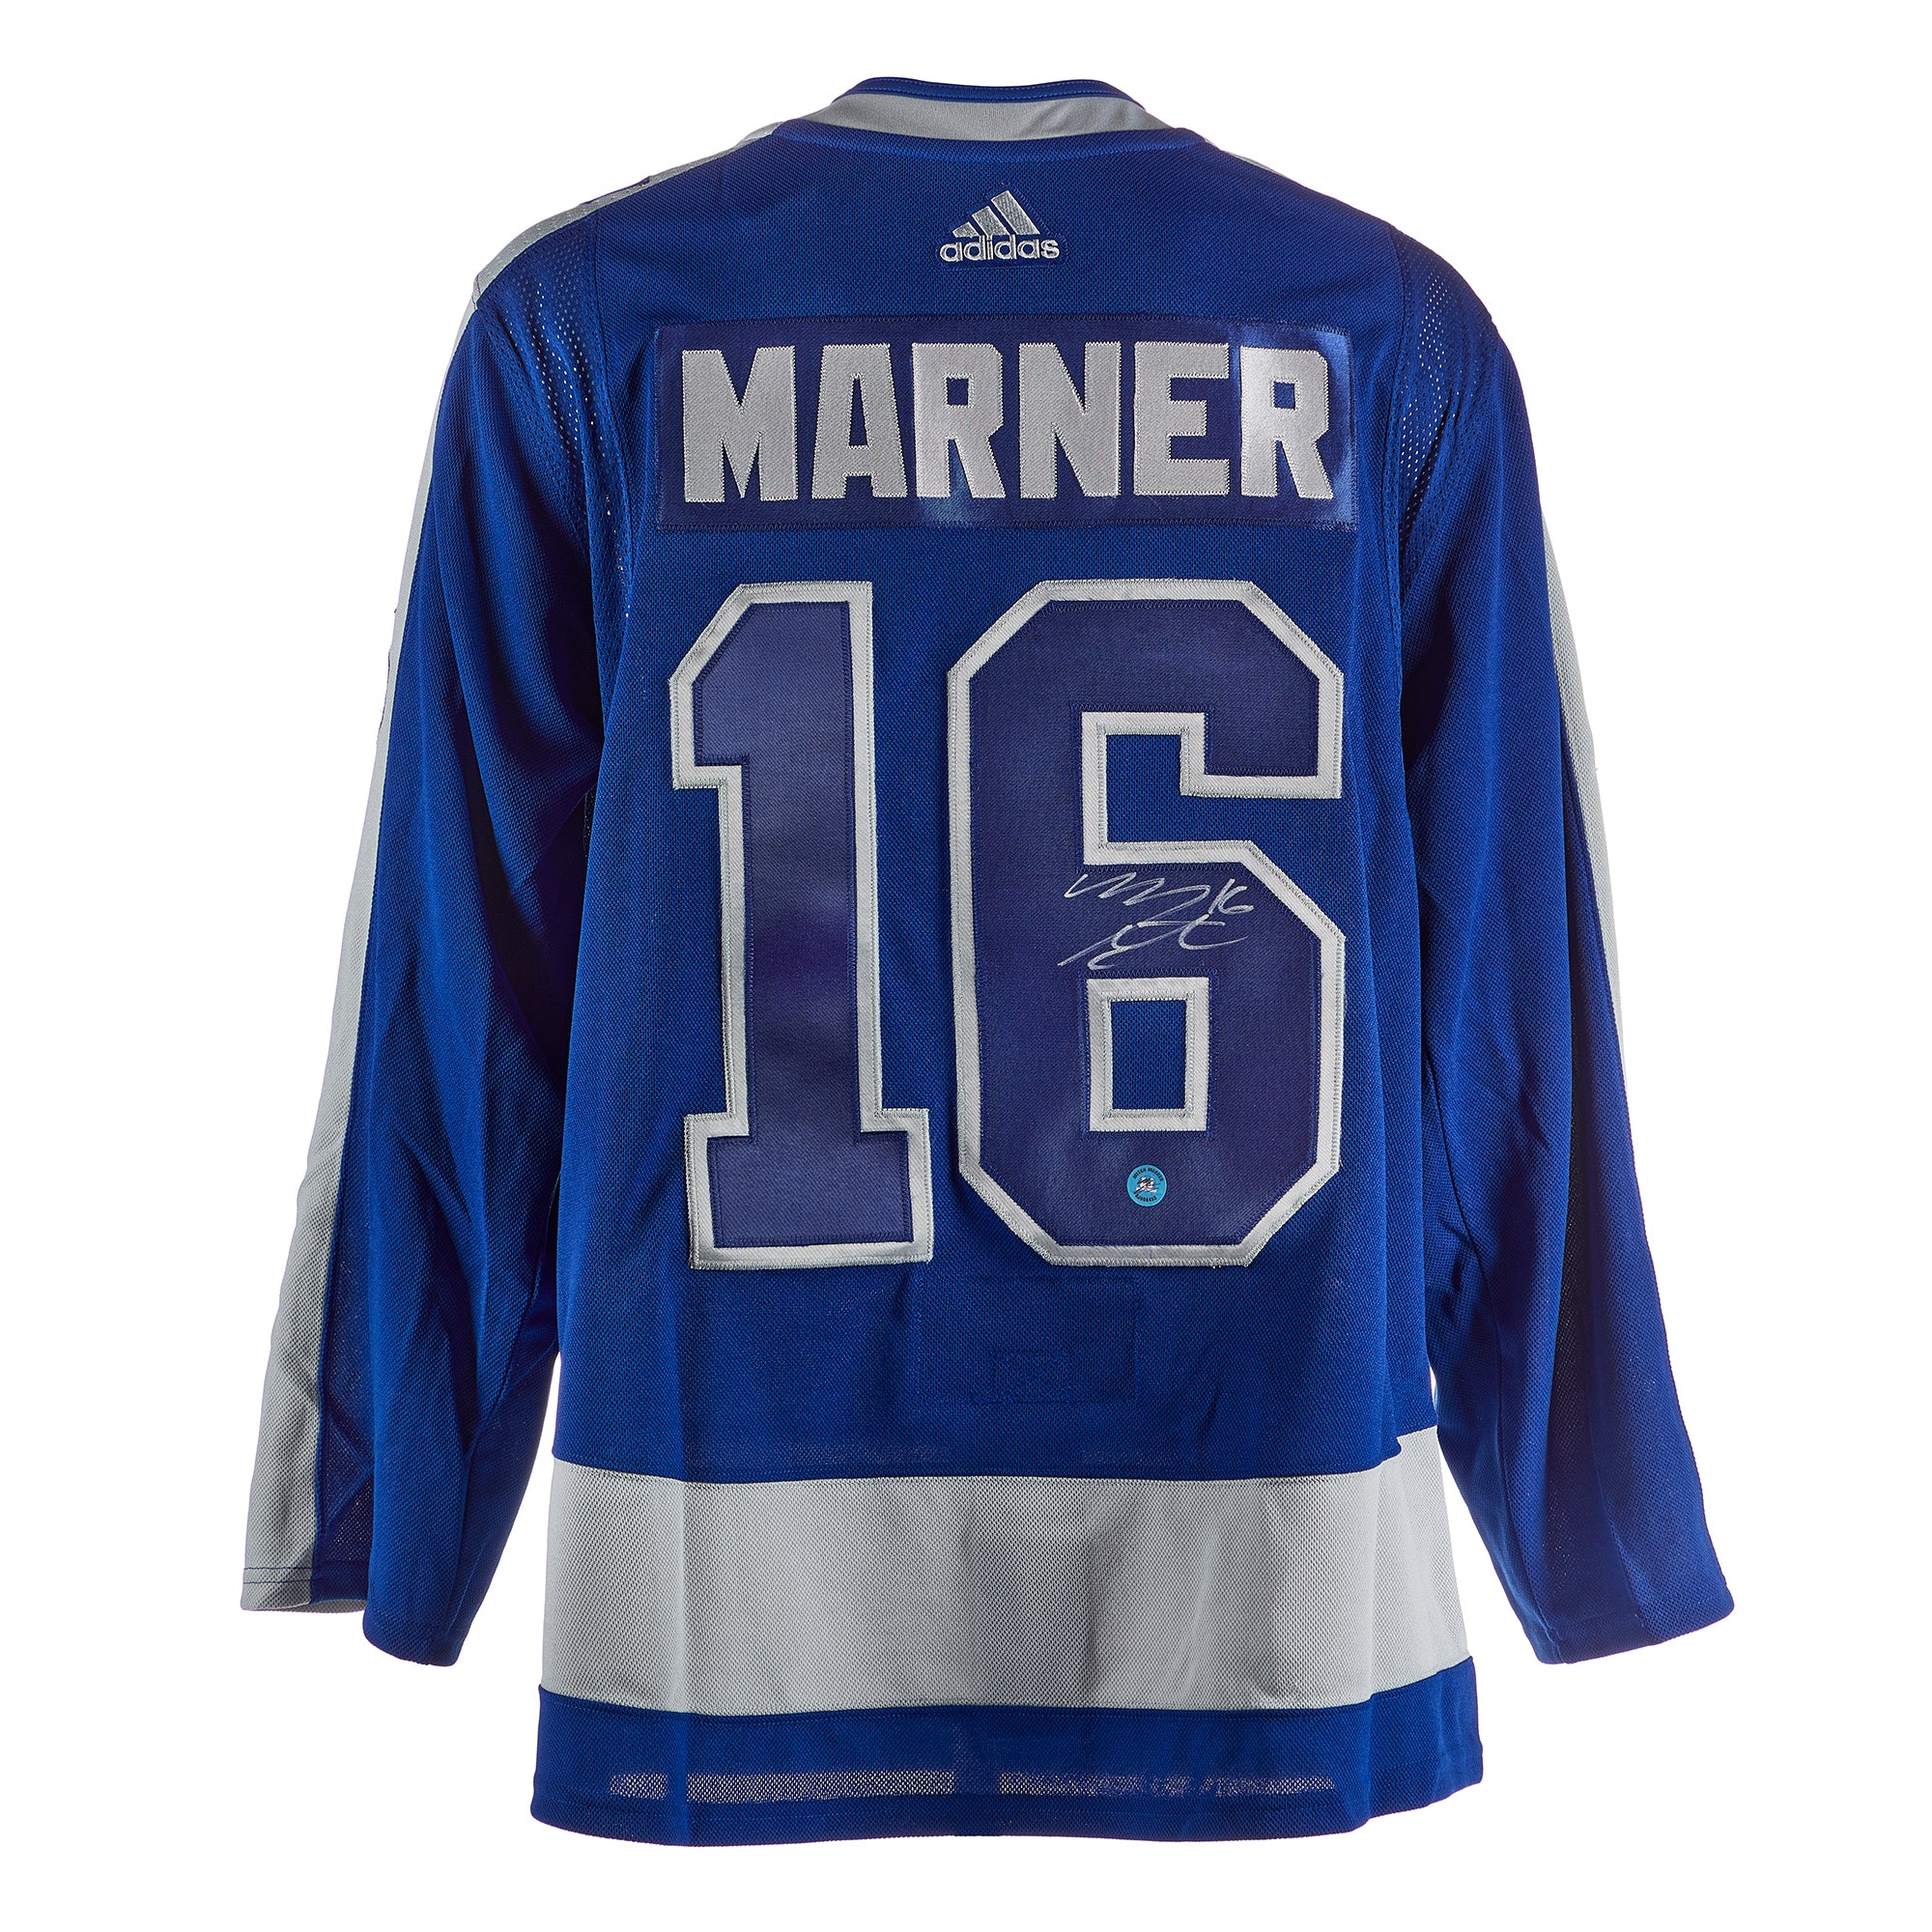 Mitch Marner Toronto Maple Leafs Autographed Signed St Pats